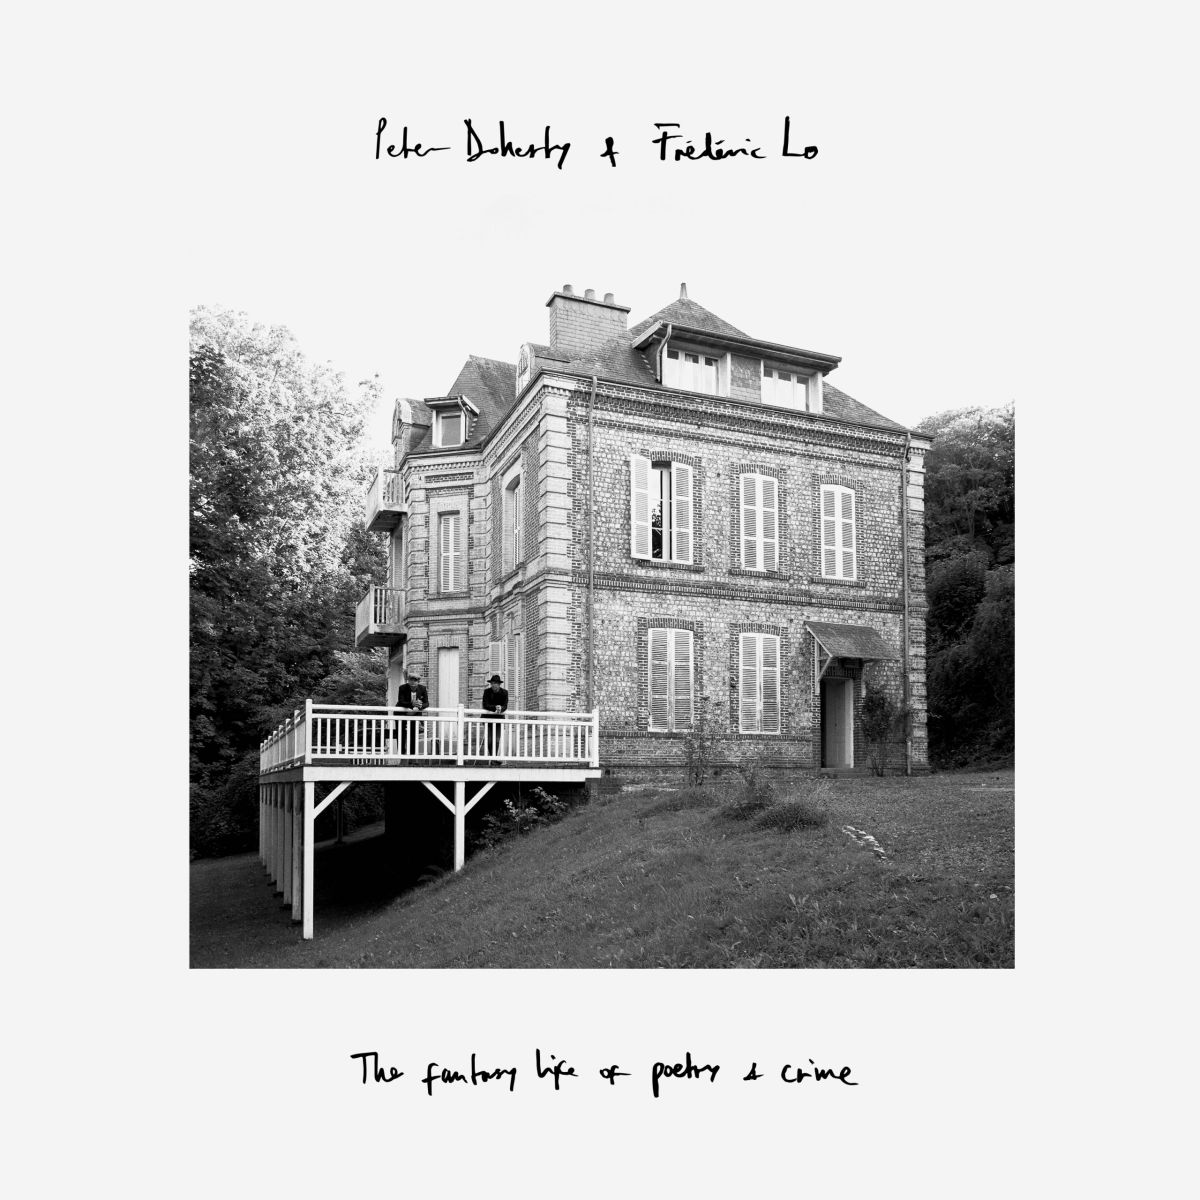 Peter Doherty and Frédéric Lo – The Fantasy Life of Poetry & Crime Album Review